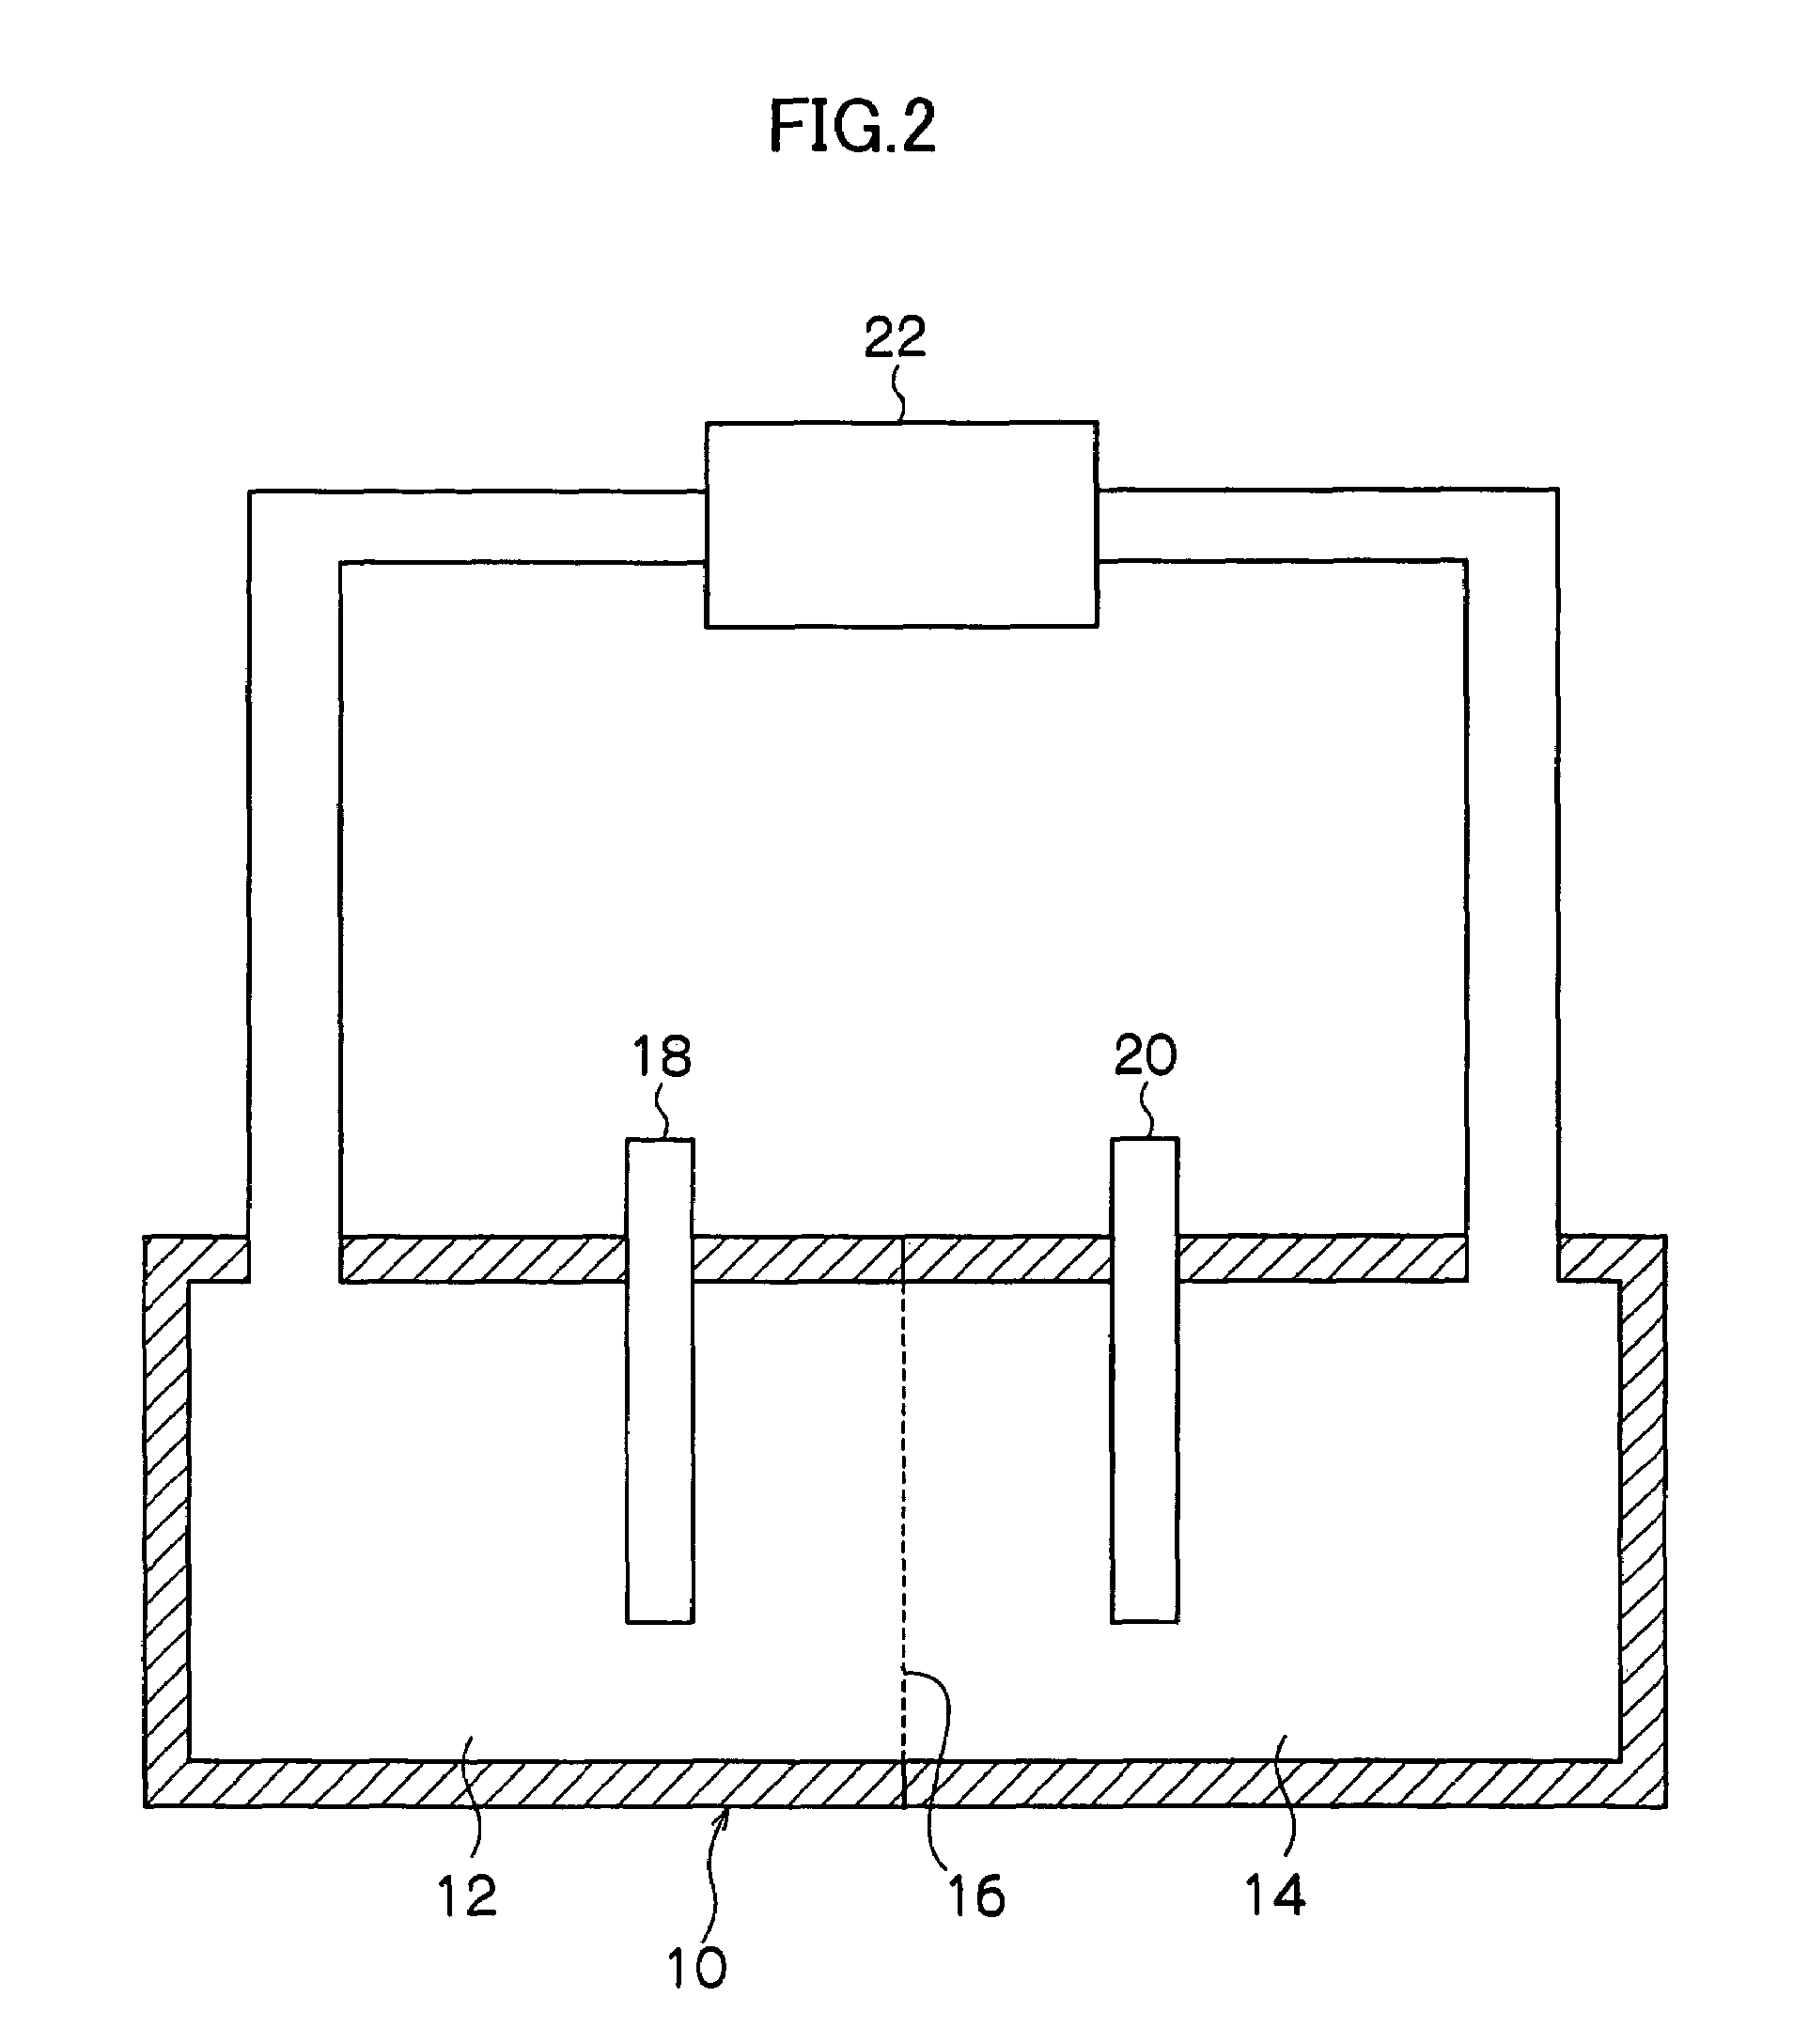 Water-activated cell and method of power generation